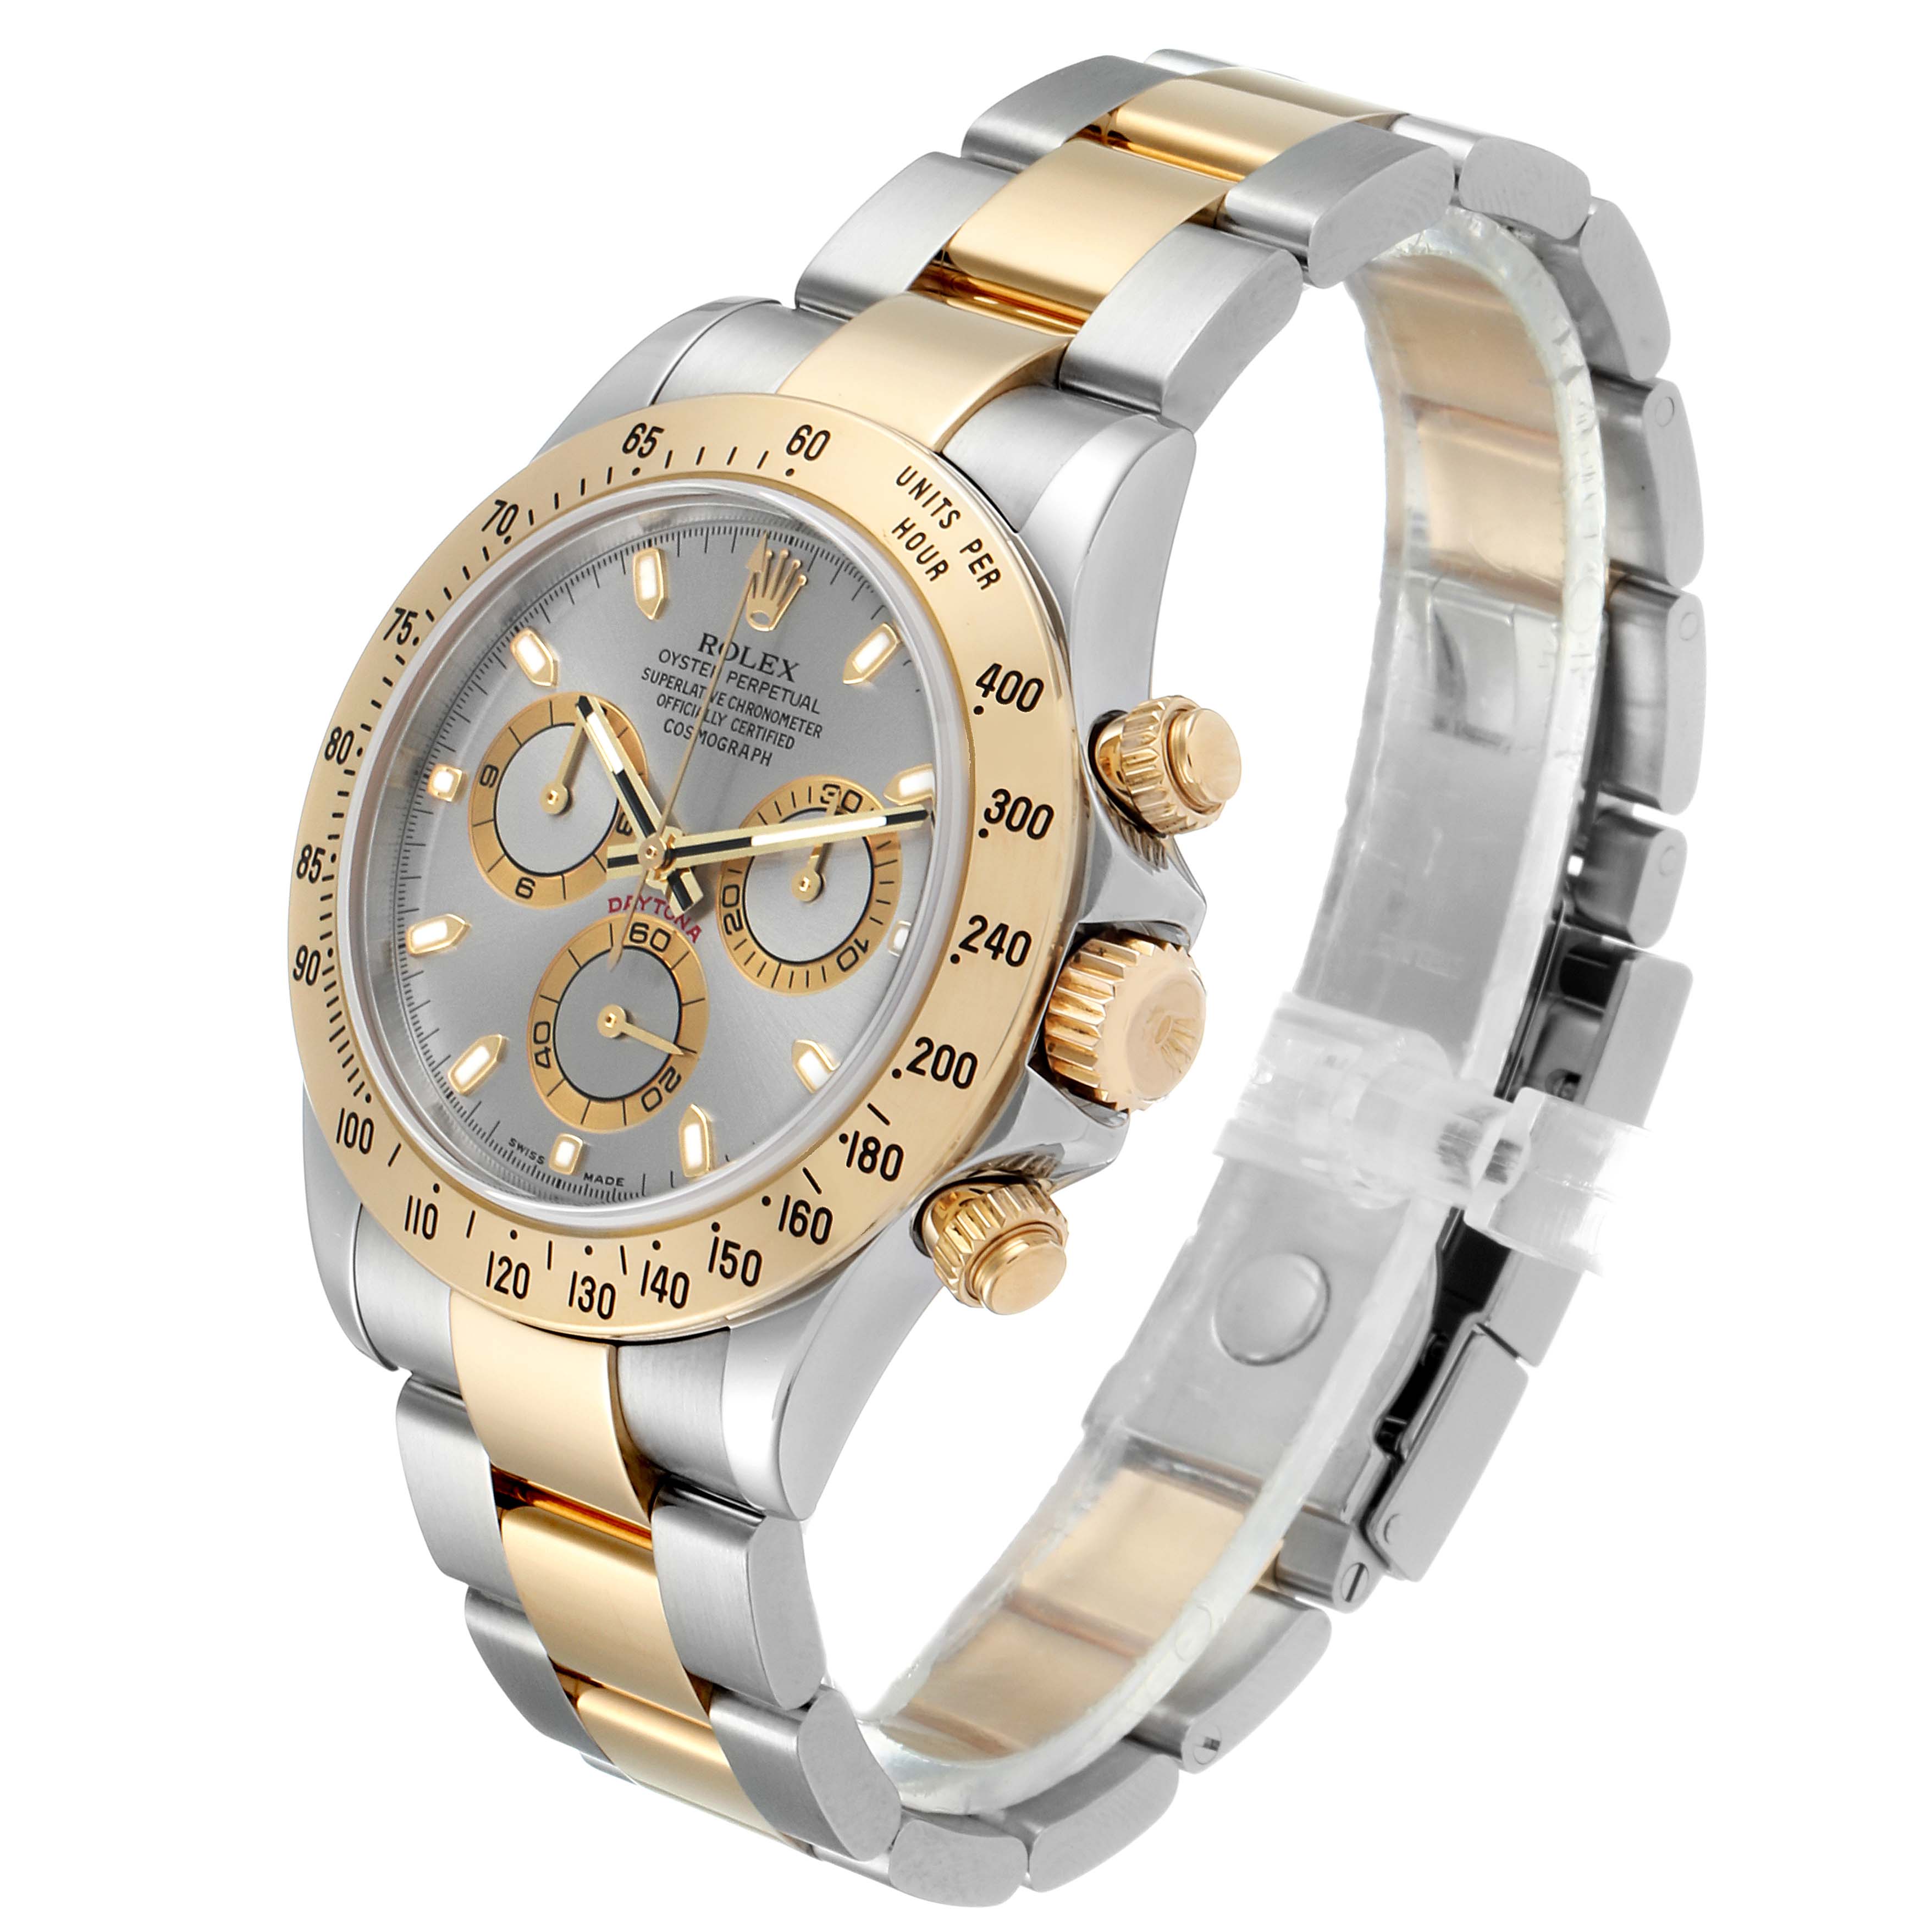 Rolex Daytona Steel Yellow Gold Slate Dial Mens Watch 116523 Box Papers ...